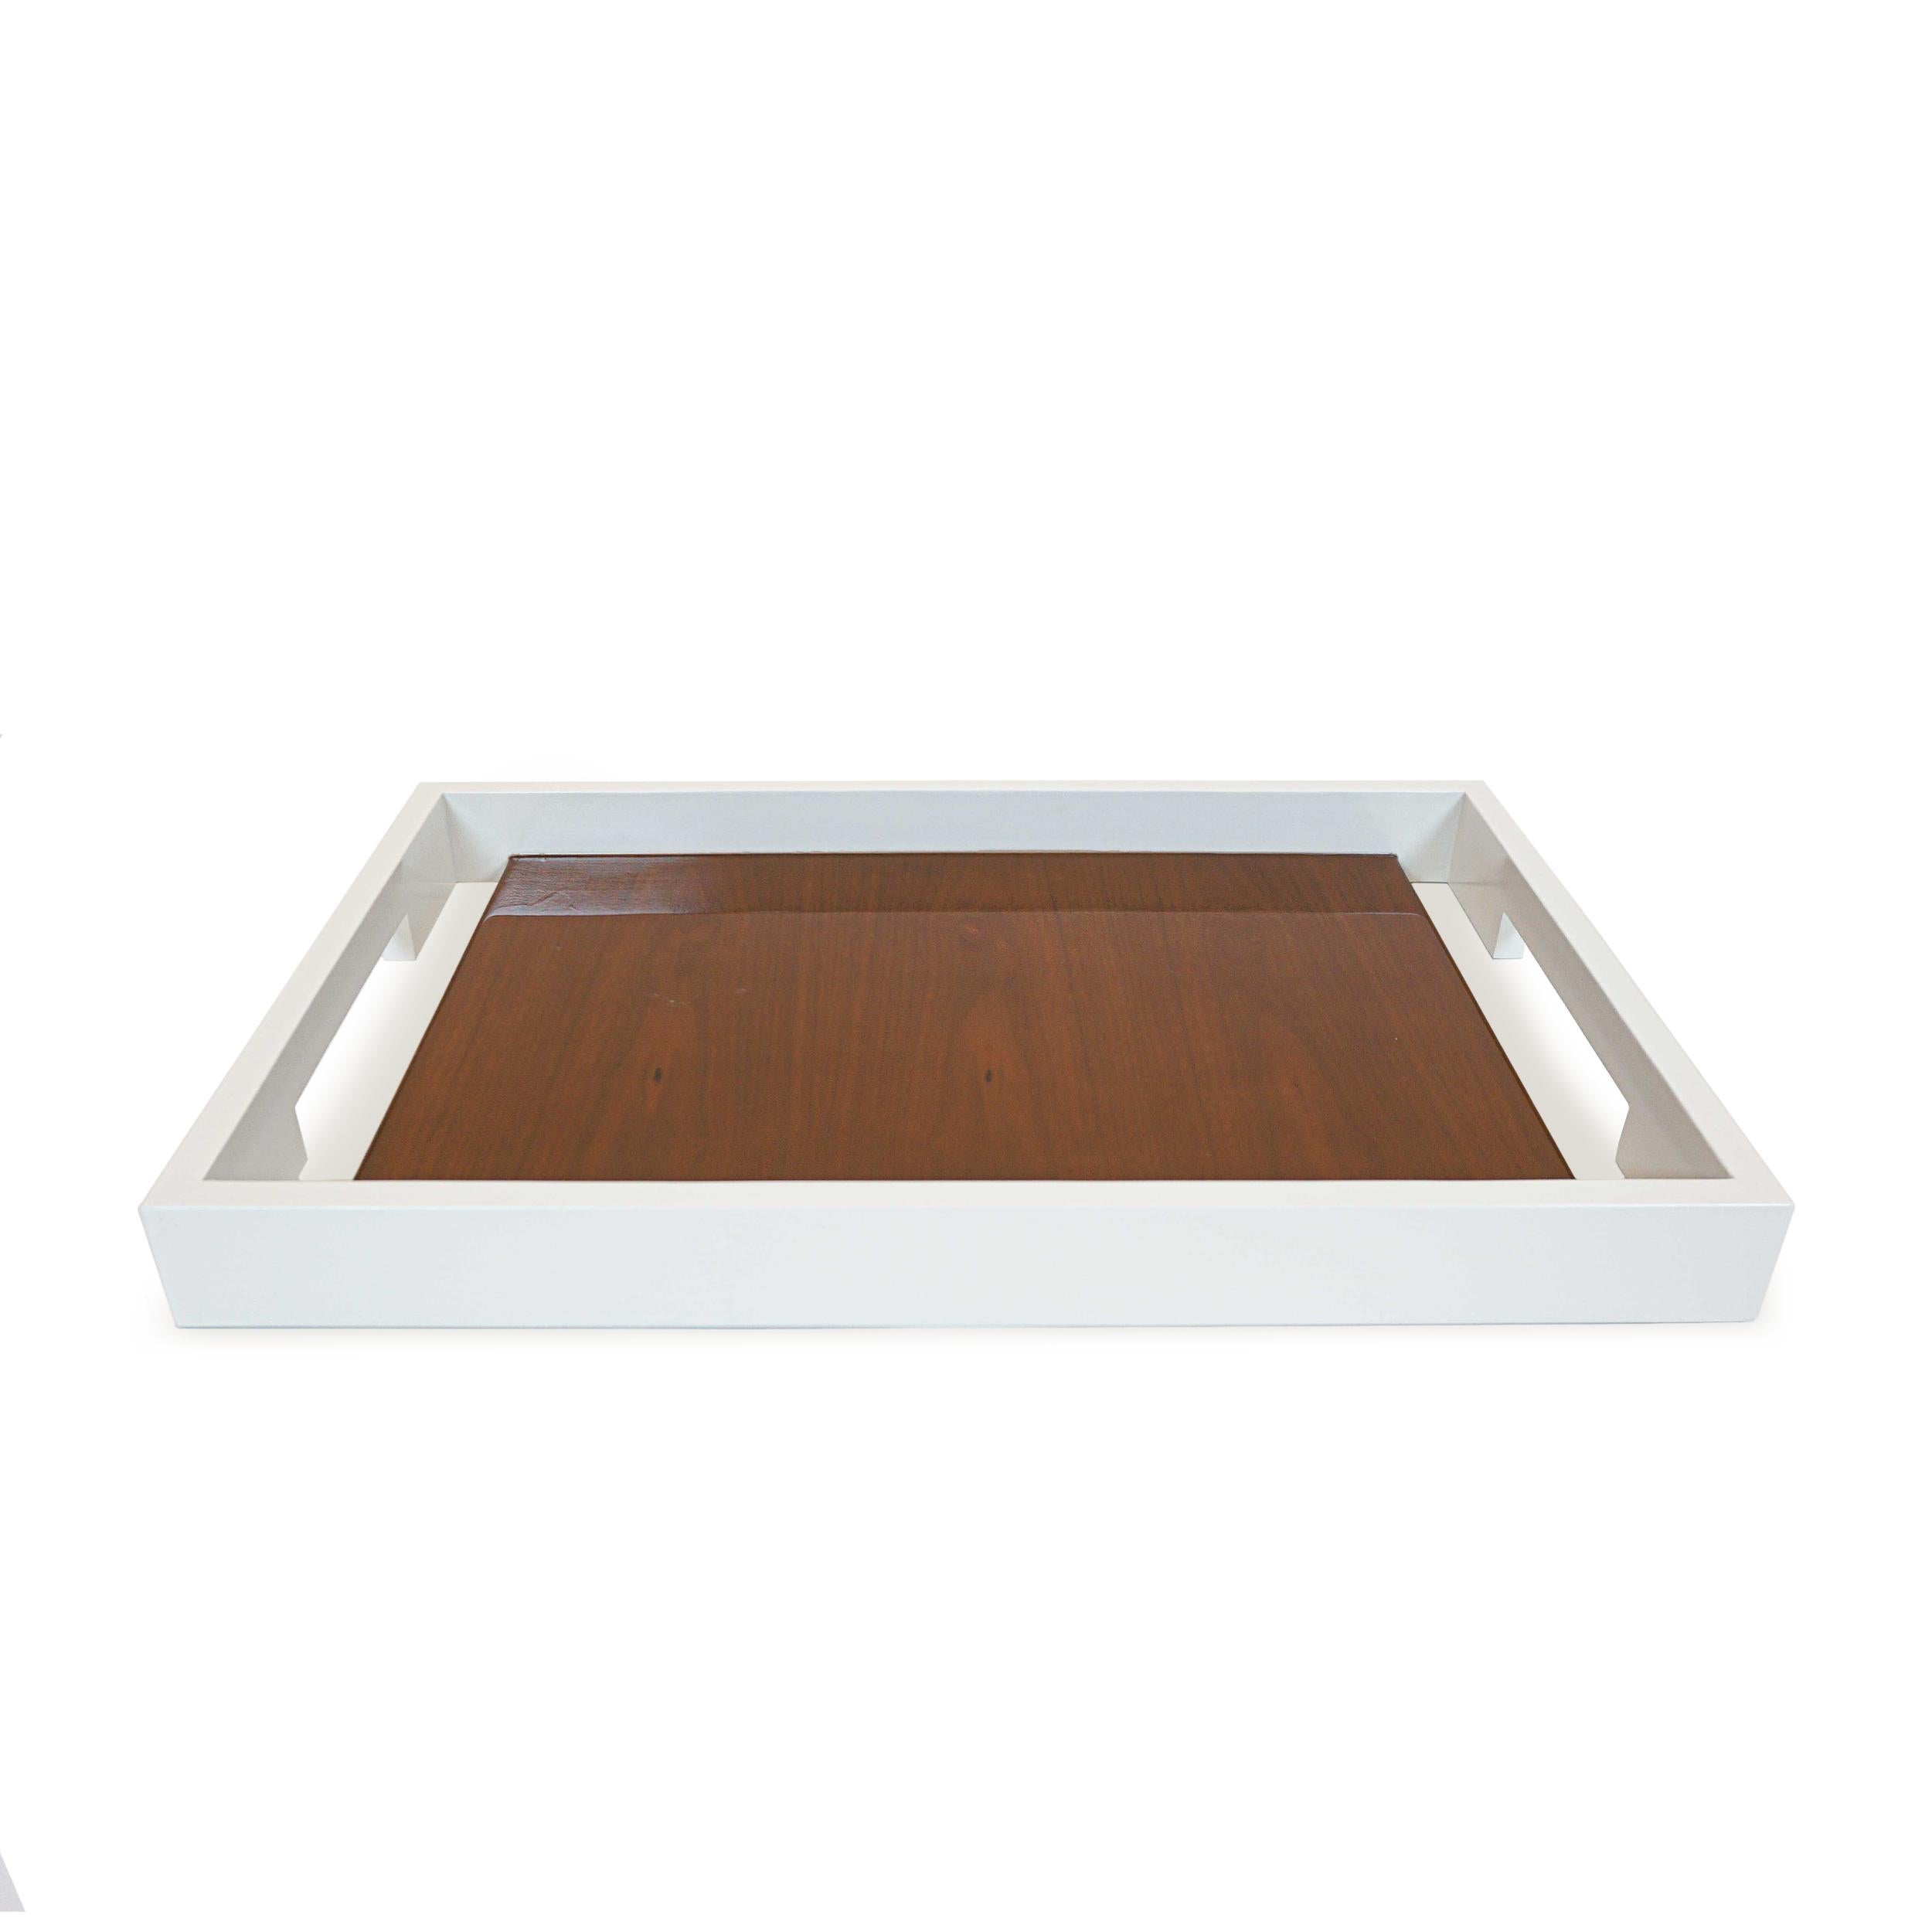 White lacquer tray made from solid hard maple features a contrasting Walnut Center. Perfect for displaying collectibles or as a serving piece. Tray can be customized in size, lacquer and wood species and finish. Customization may change price.